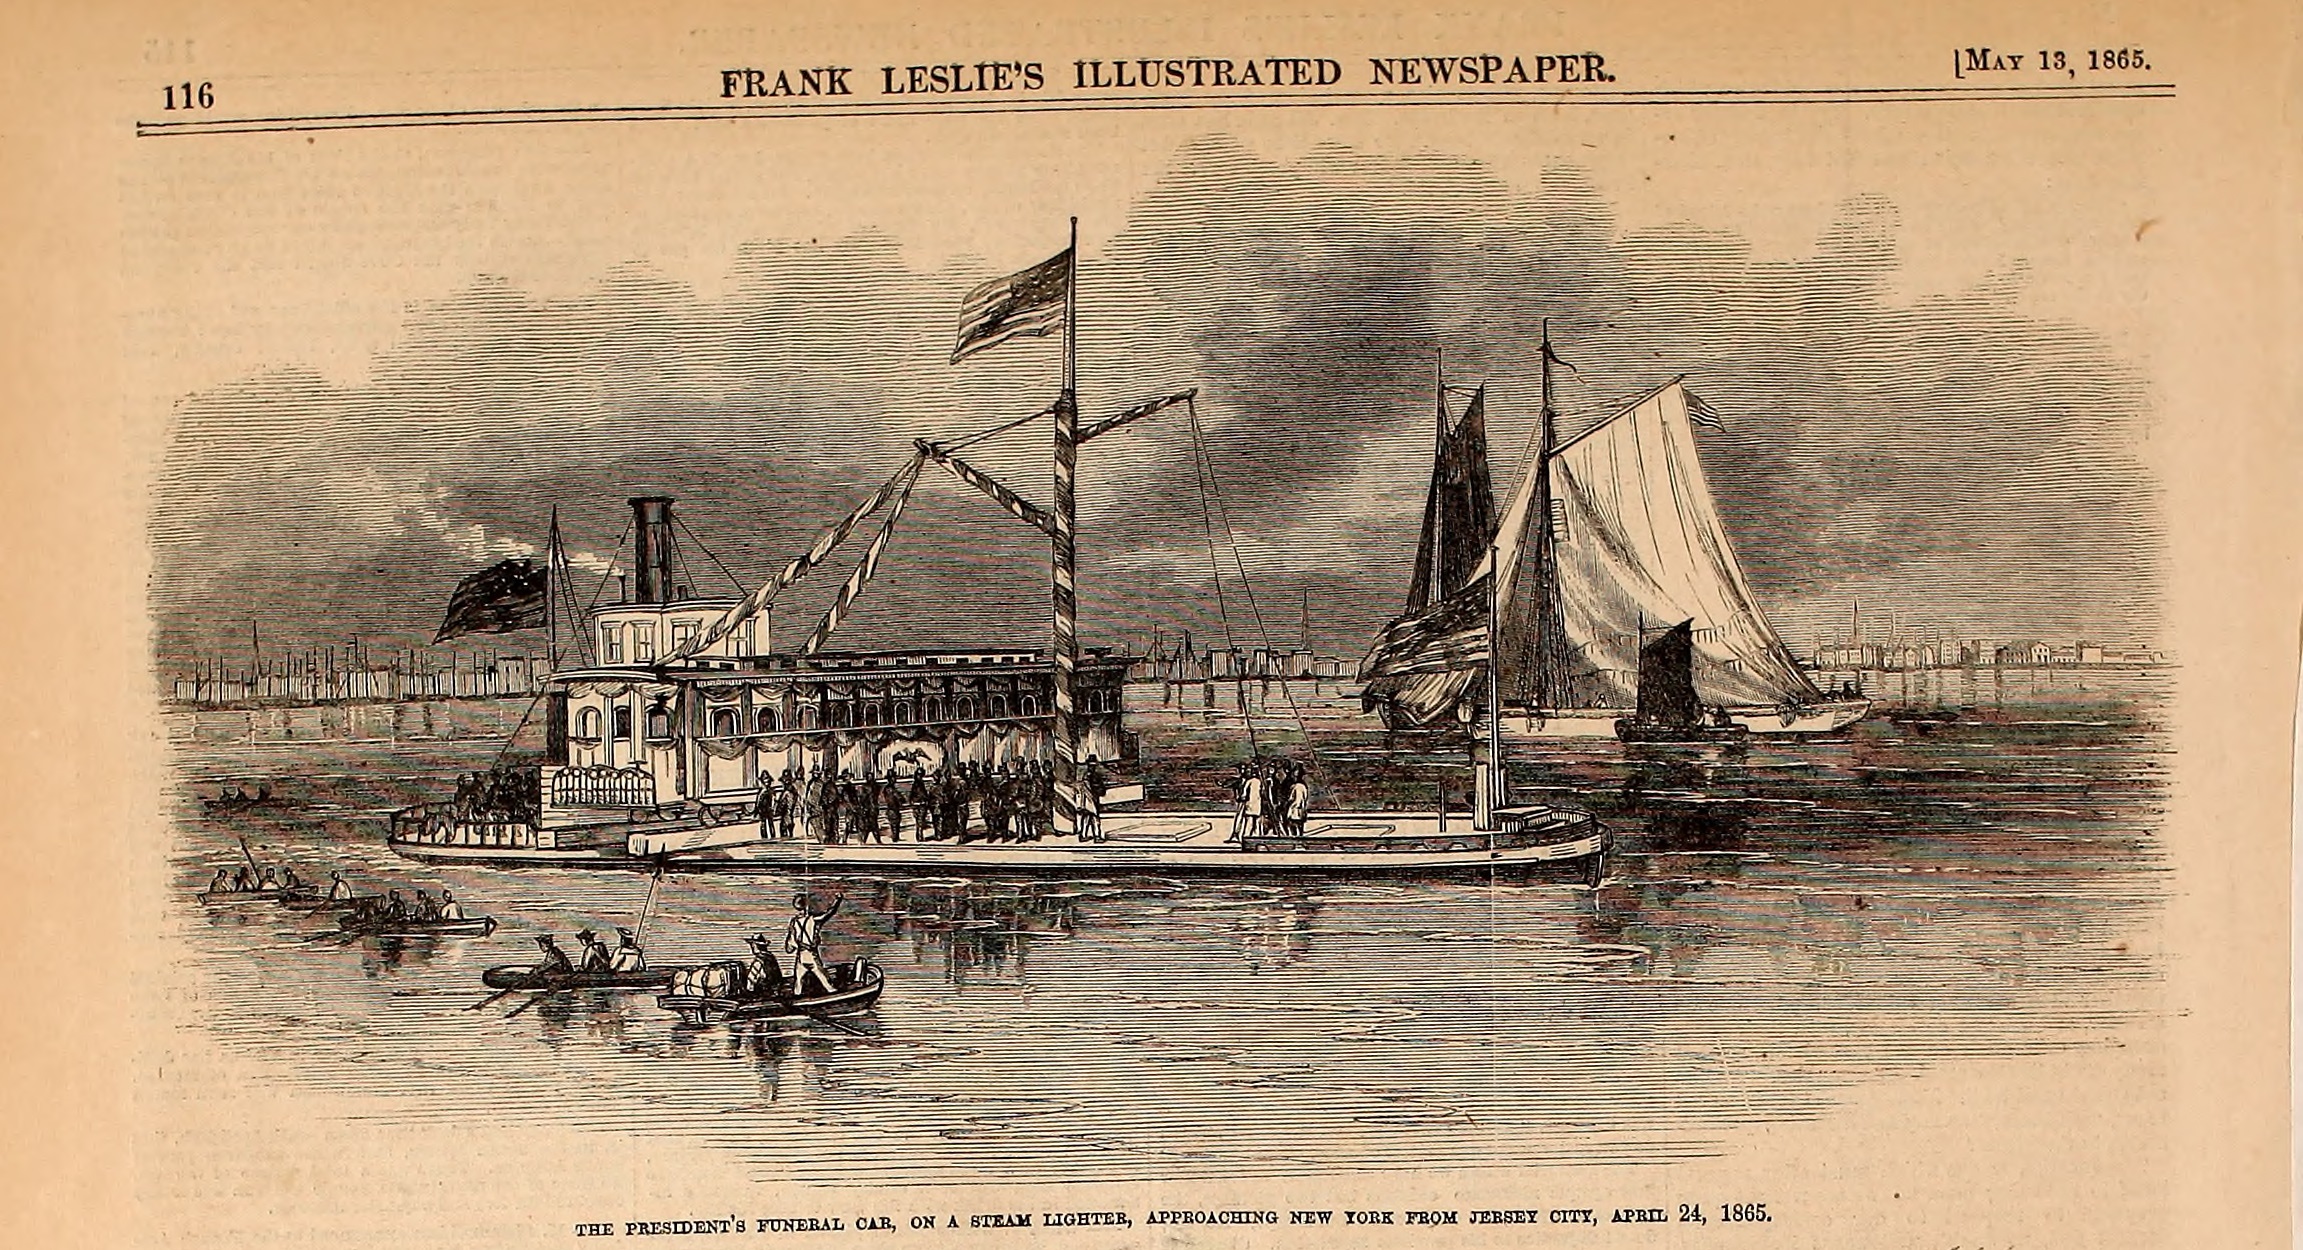 President Lincoln's Funeral Train on a Steamer - Frank Leslie's Illustrated Newspaper Drawing